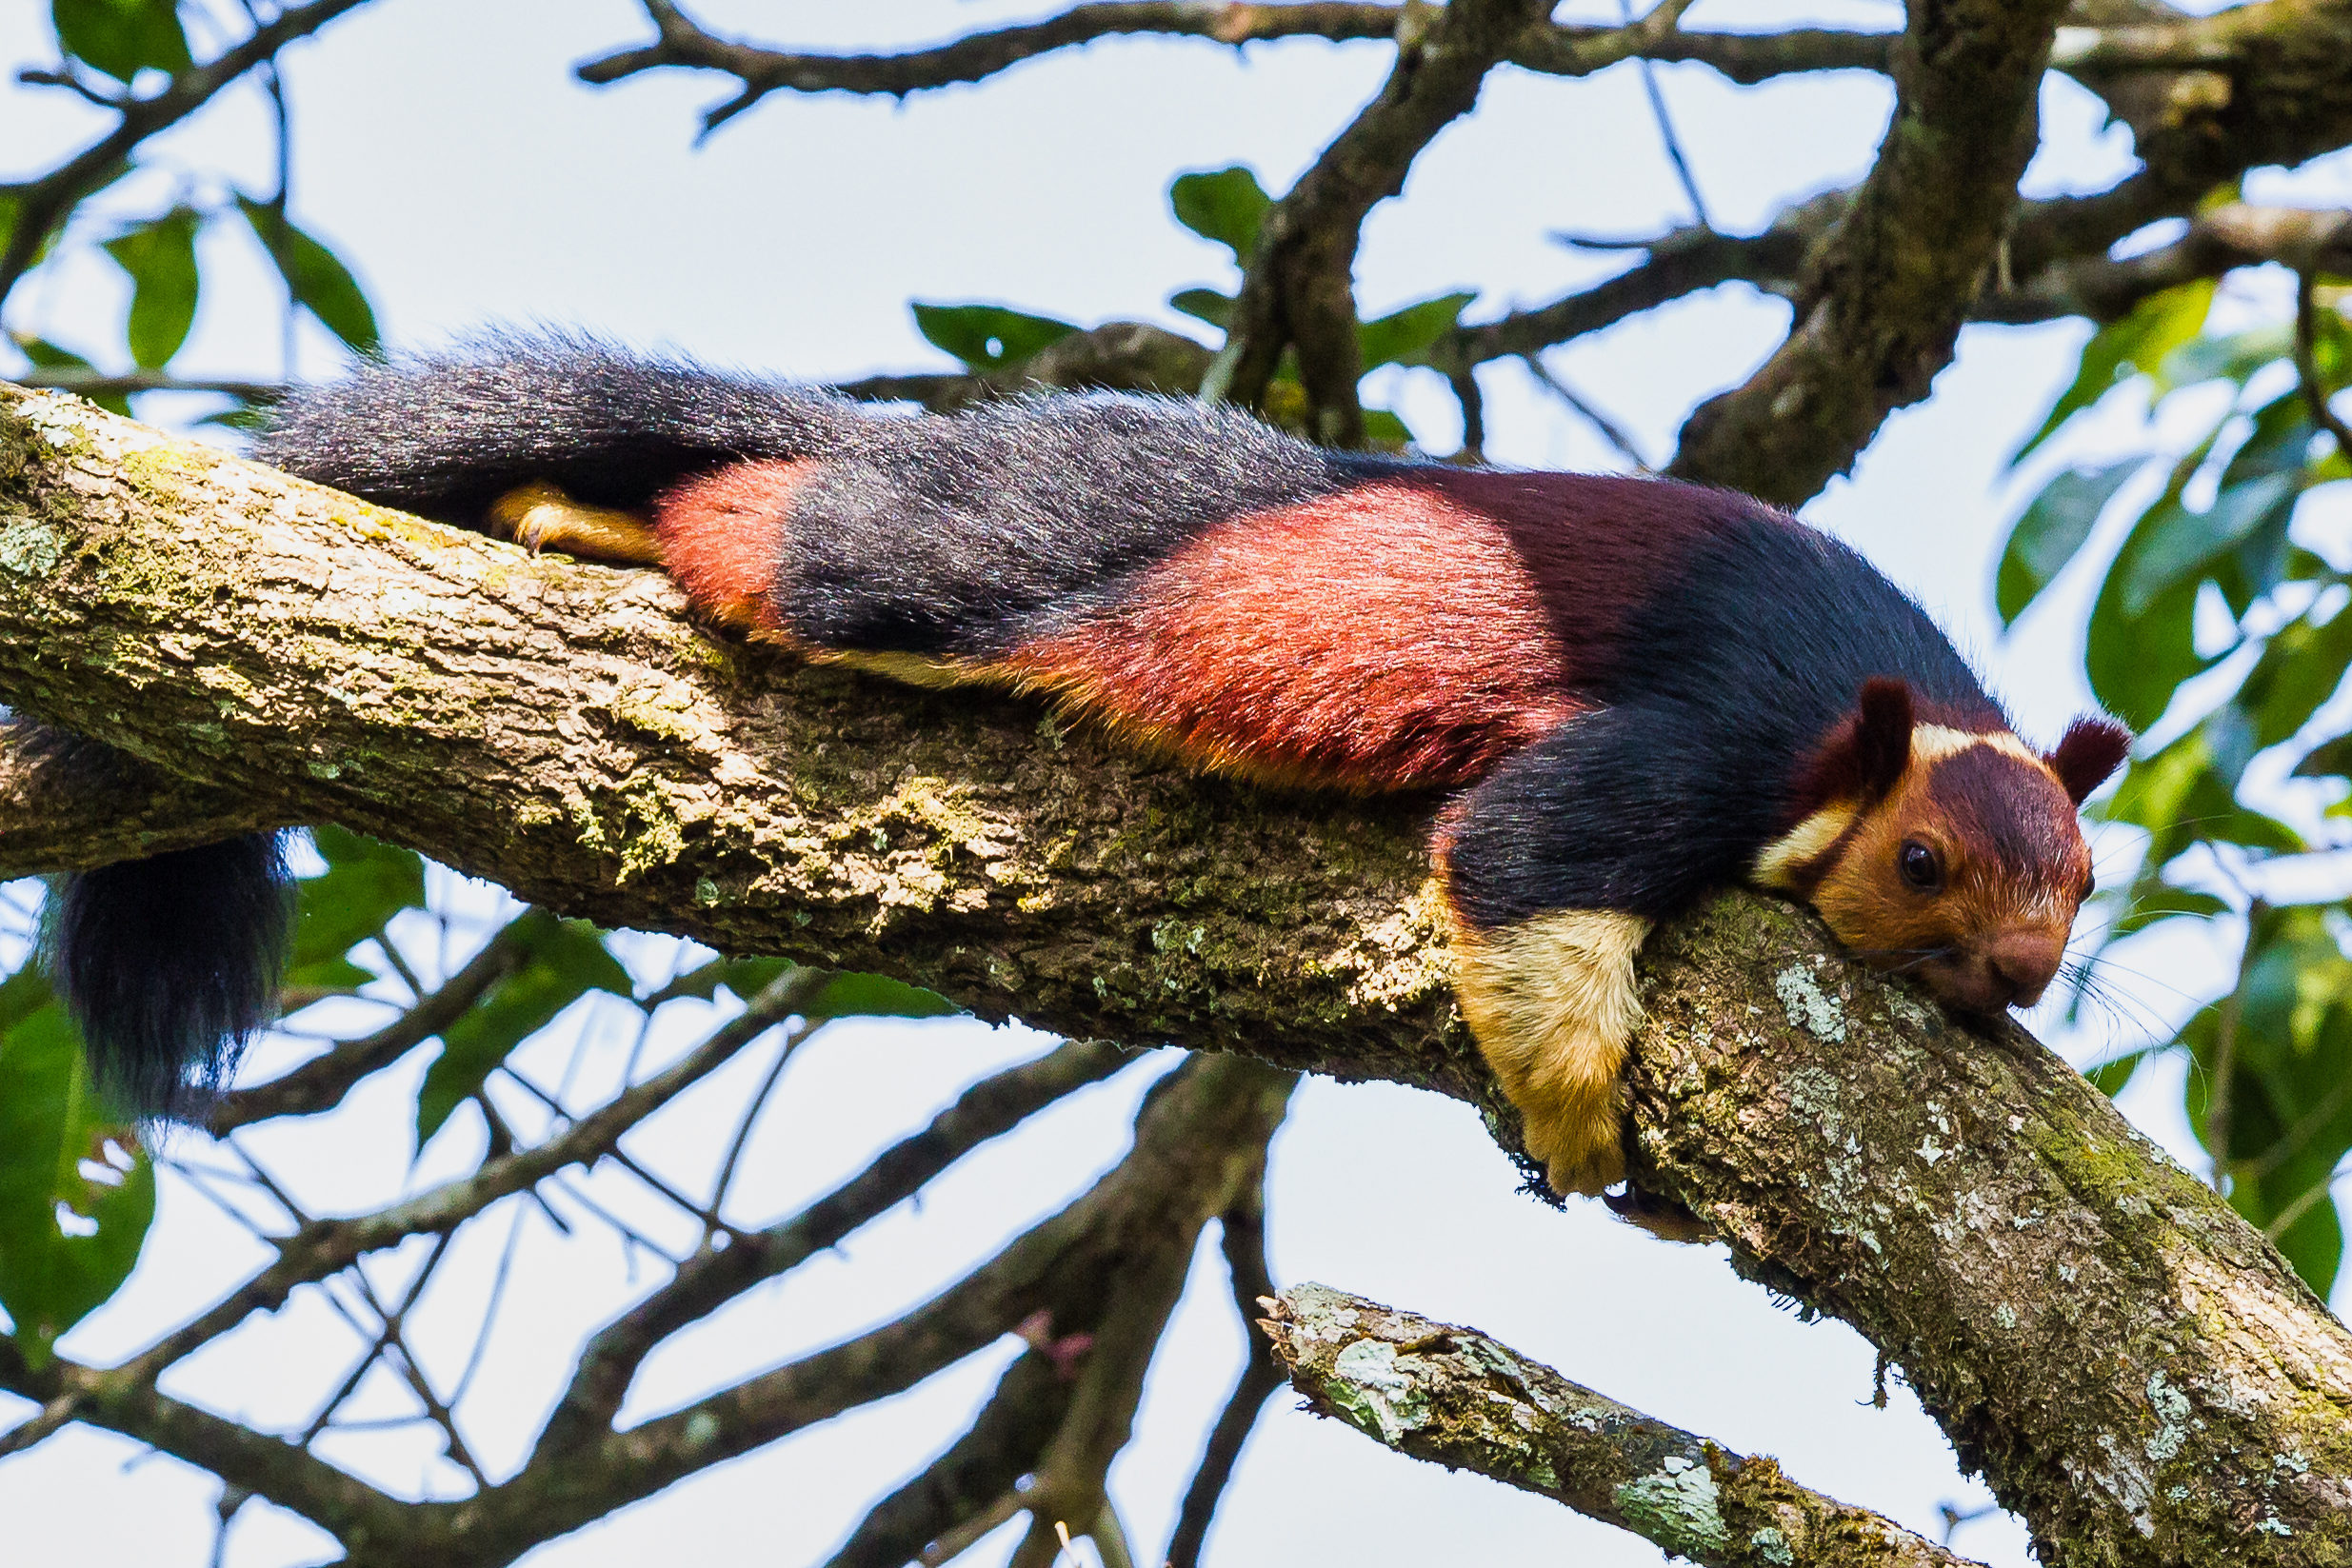 Witness extraordinary Indian wildlife like this Malabar giant squirrel in Periyar National Park when you take a tailor-made holiday with Alfred&.